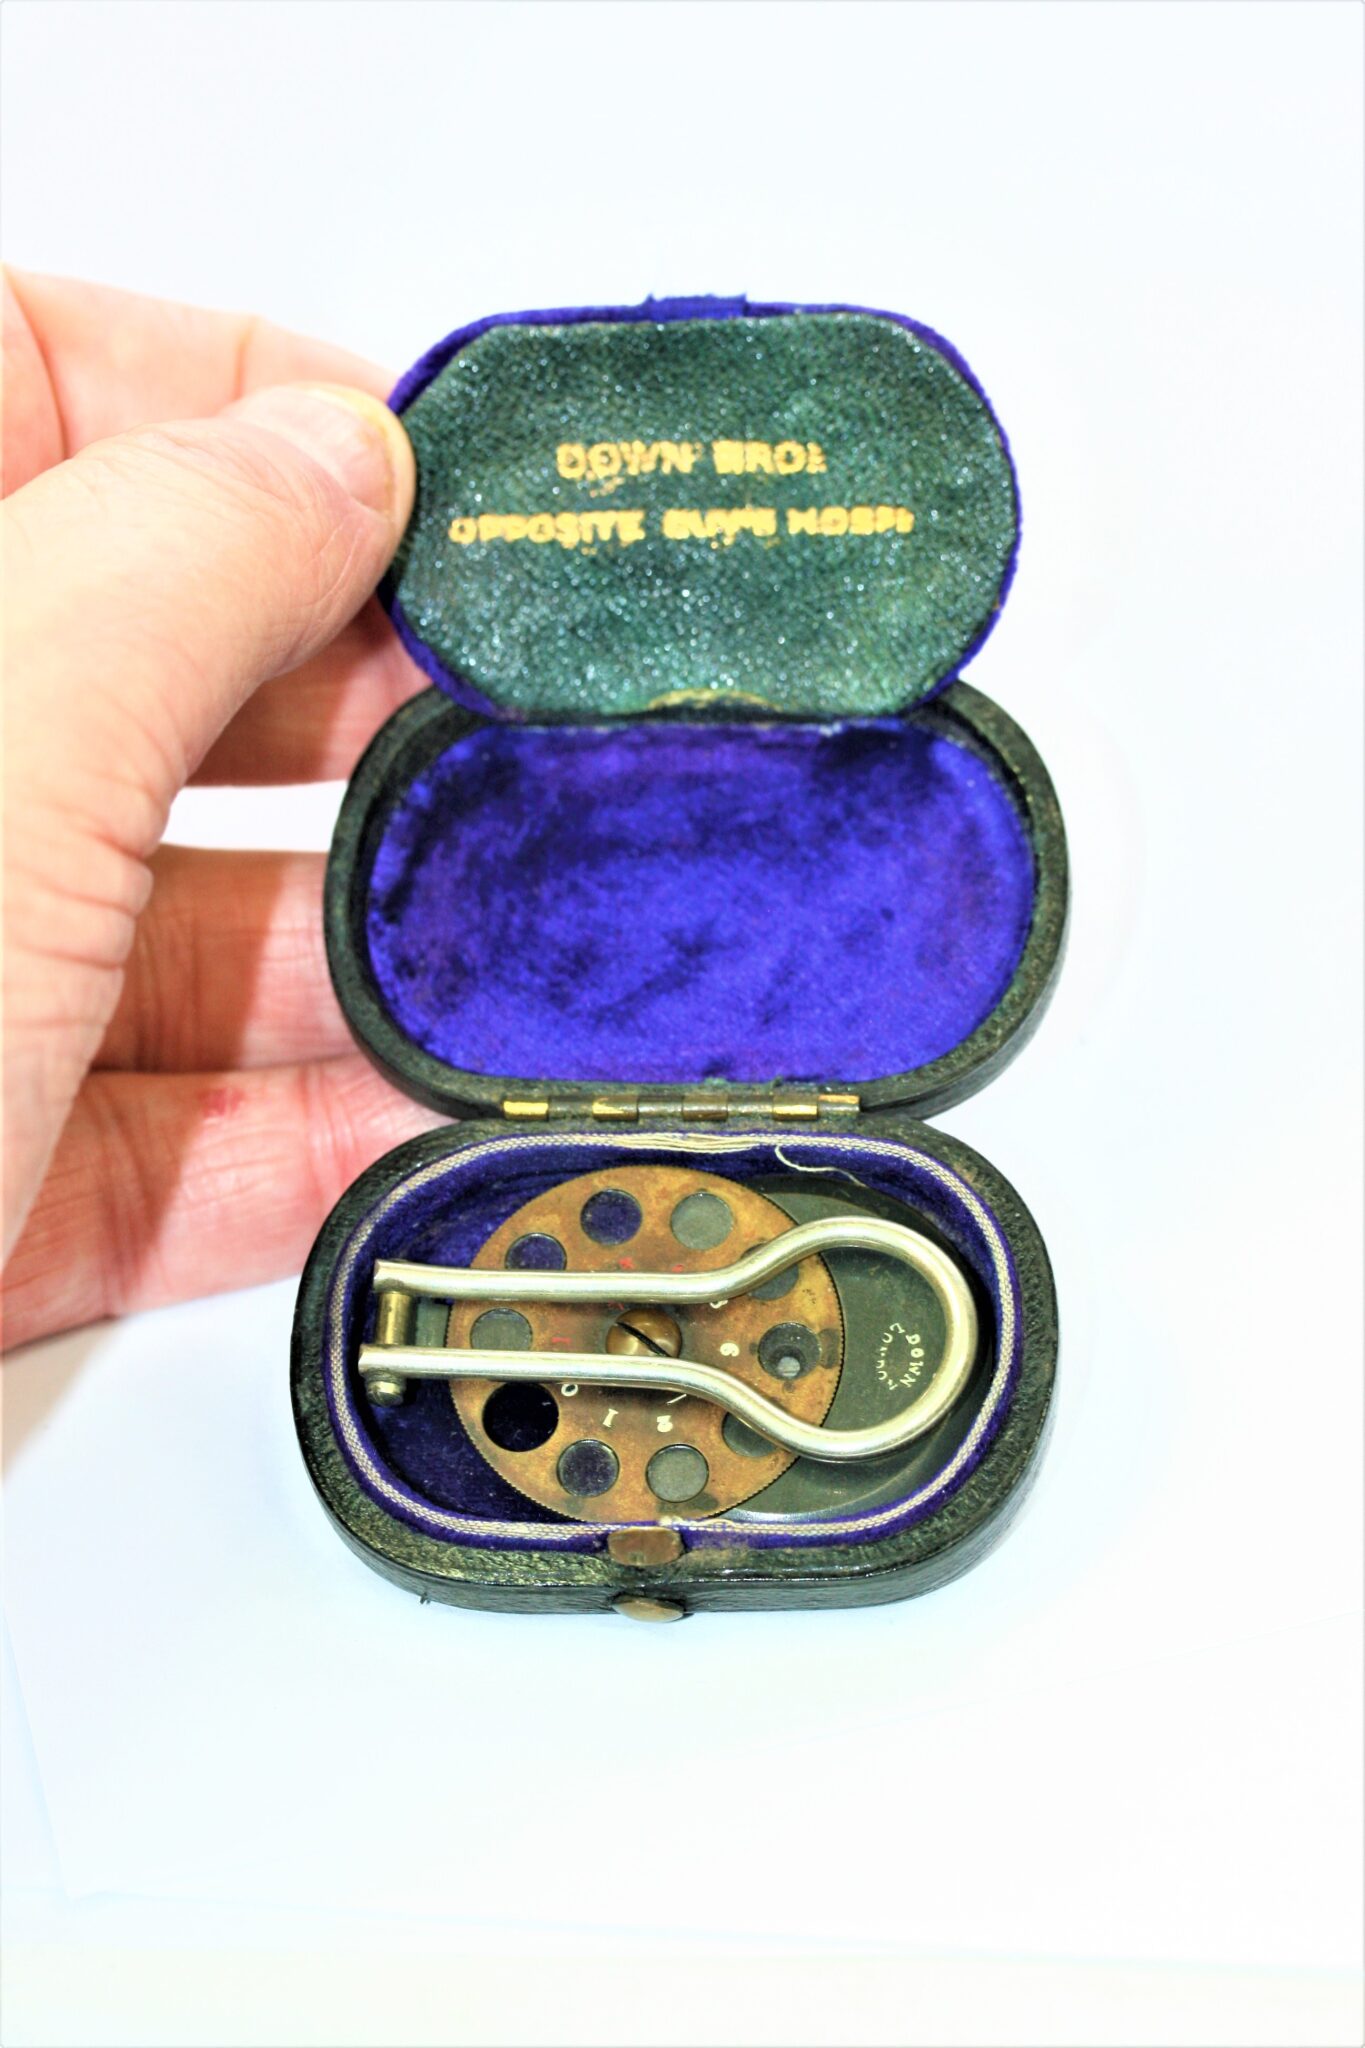 MINIATURE OPHTHALMOSCOPE by DOWN Bros. C1880, WITH ITS CASE